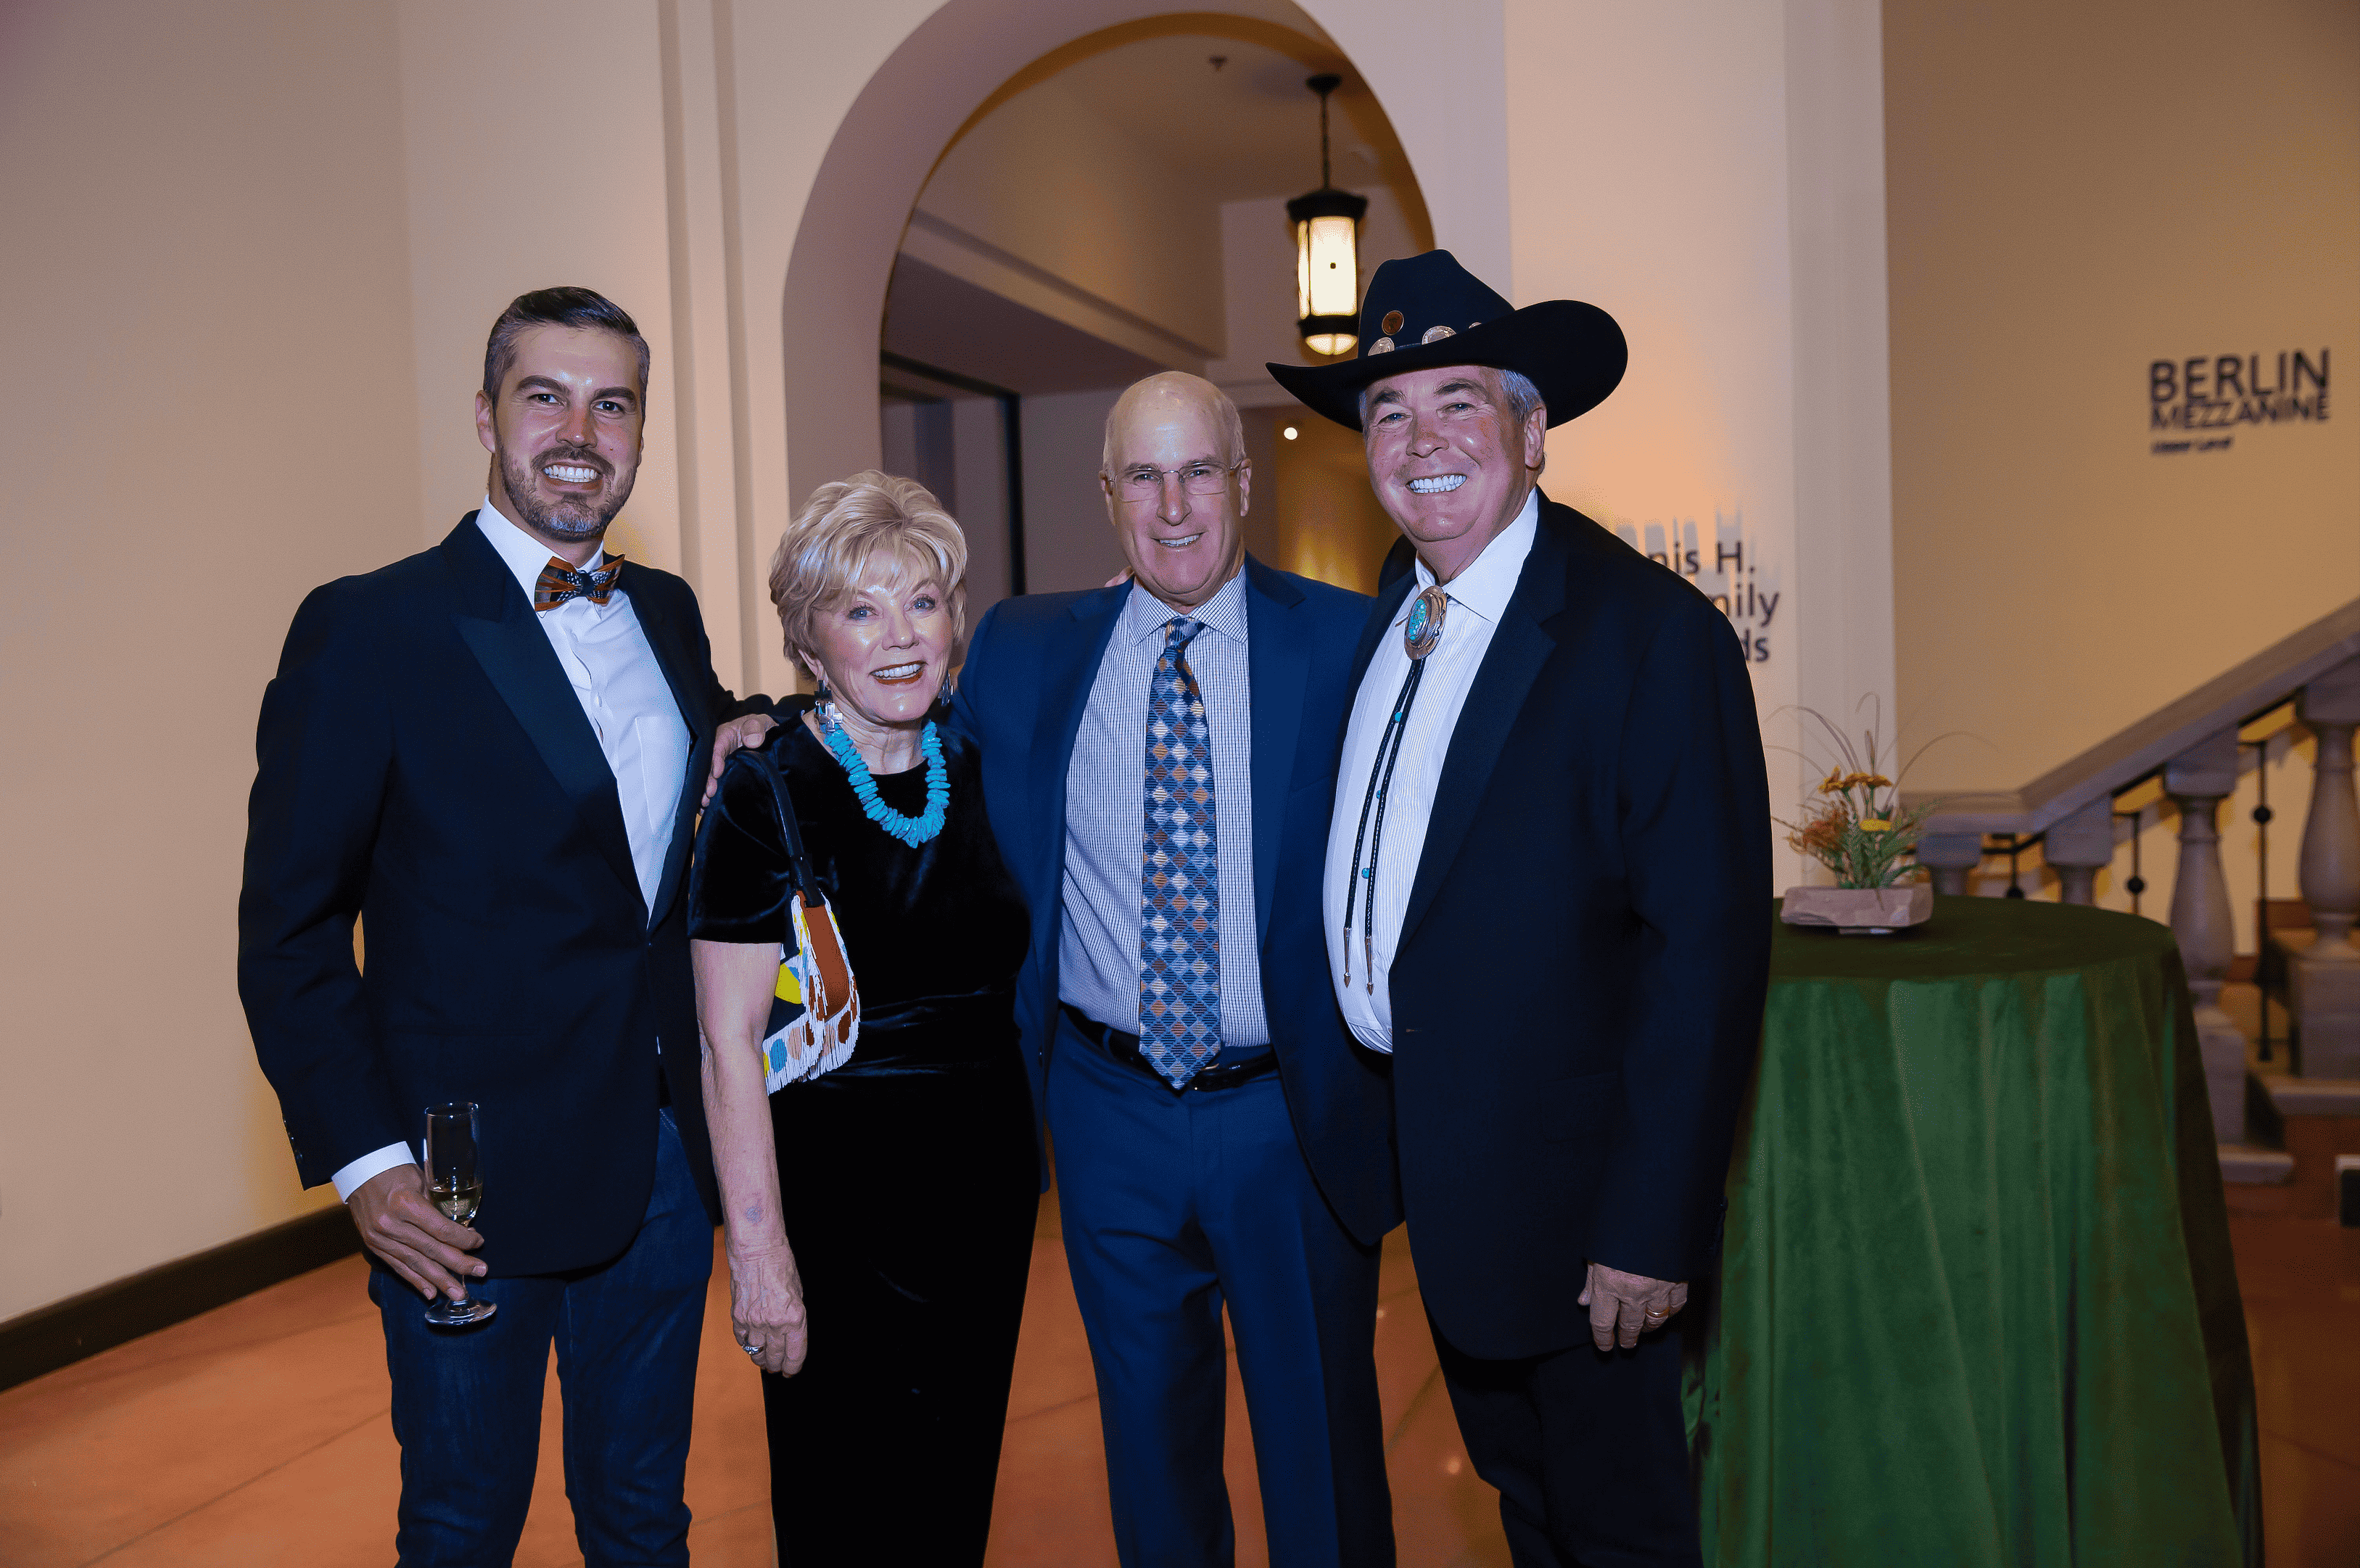 Four individuals at a moondance event, with two men wearing suits and one in a cowboy hat, standing with a woman adorned with turquoise jewelry.